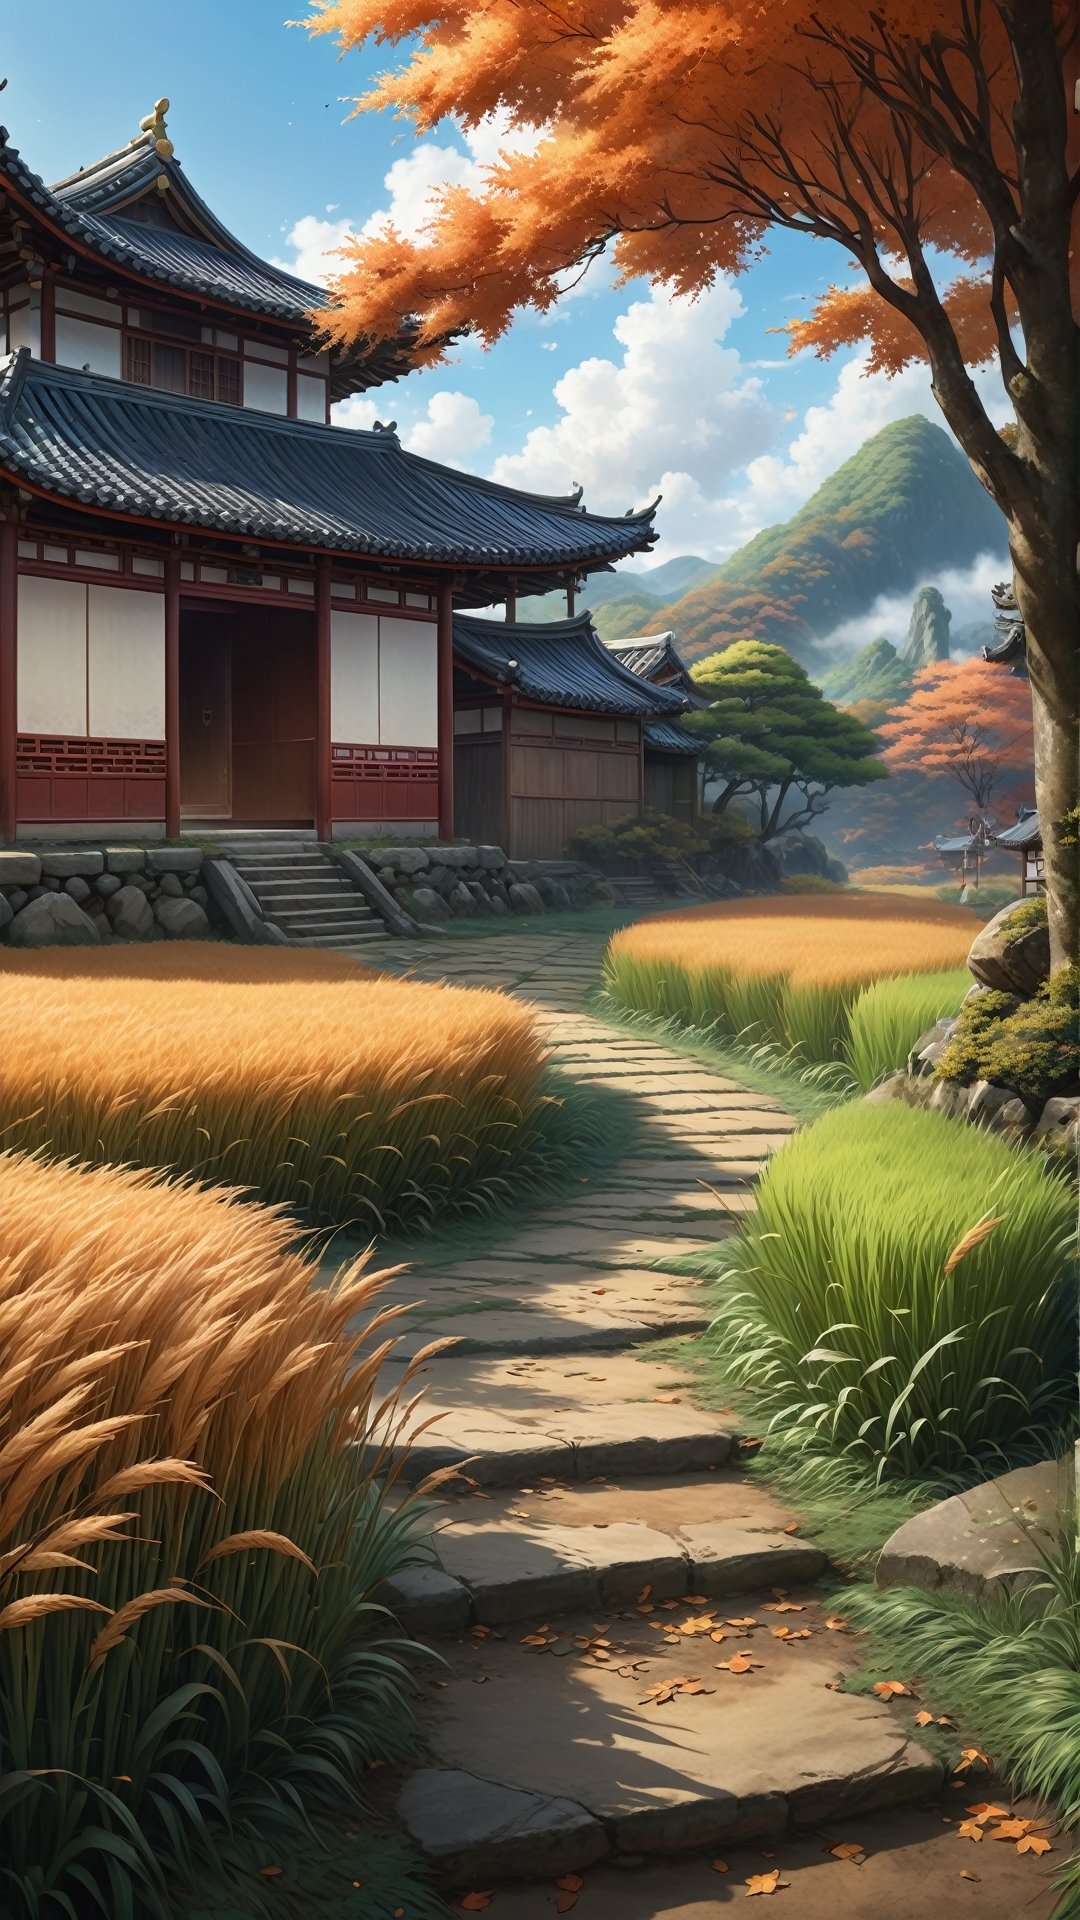 Beautiful ((isekai fantasy)) landscape of field, autumn, dog's tail grass in the ground, one chinese house in the corner, Narashige Koide, Anthropological science fiction, matte painting, cloisonnism, Instagram, asashina, Manga, leaf is falling